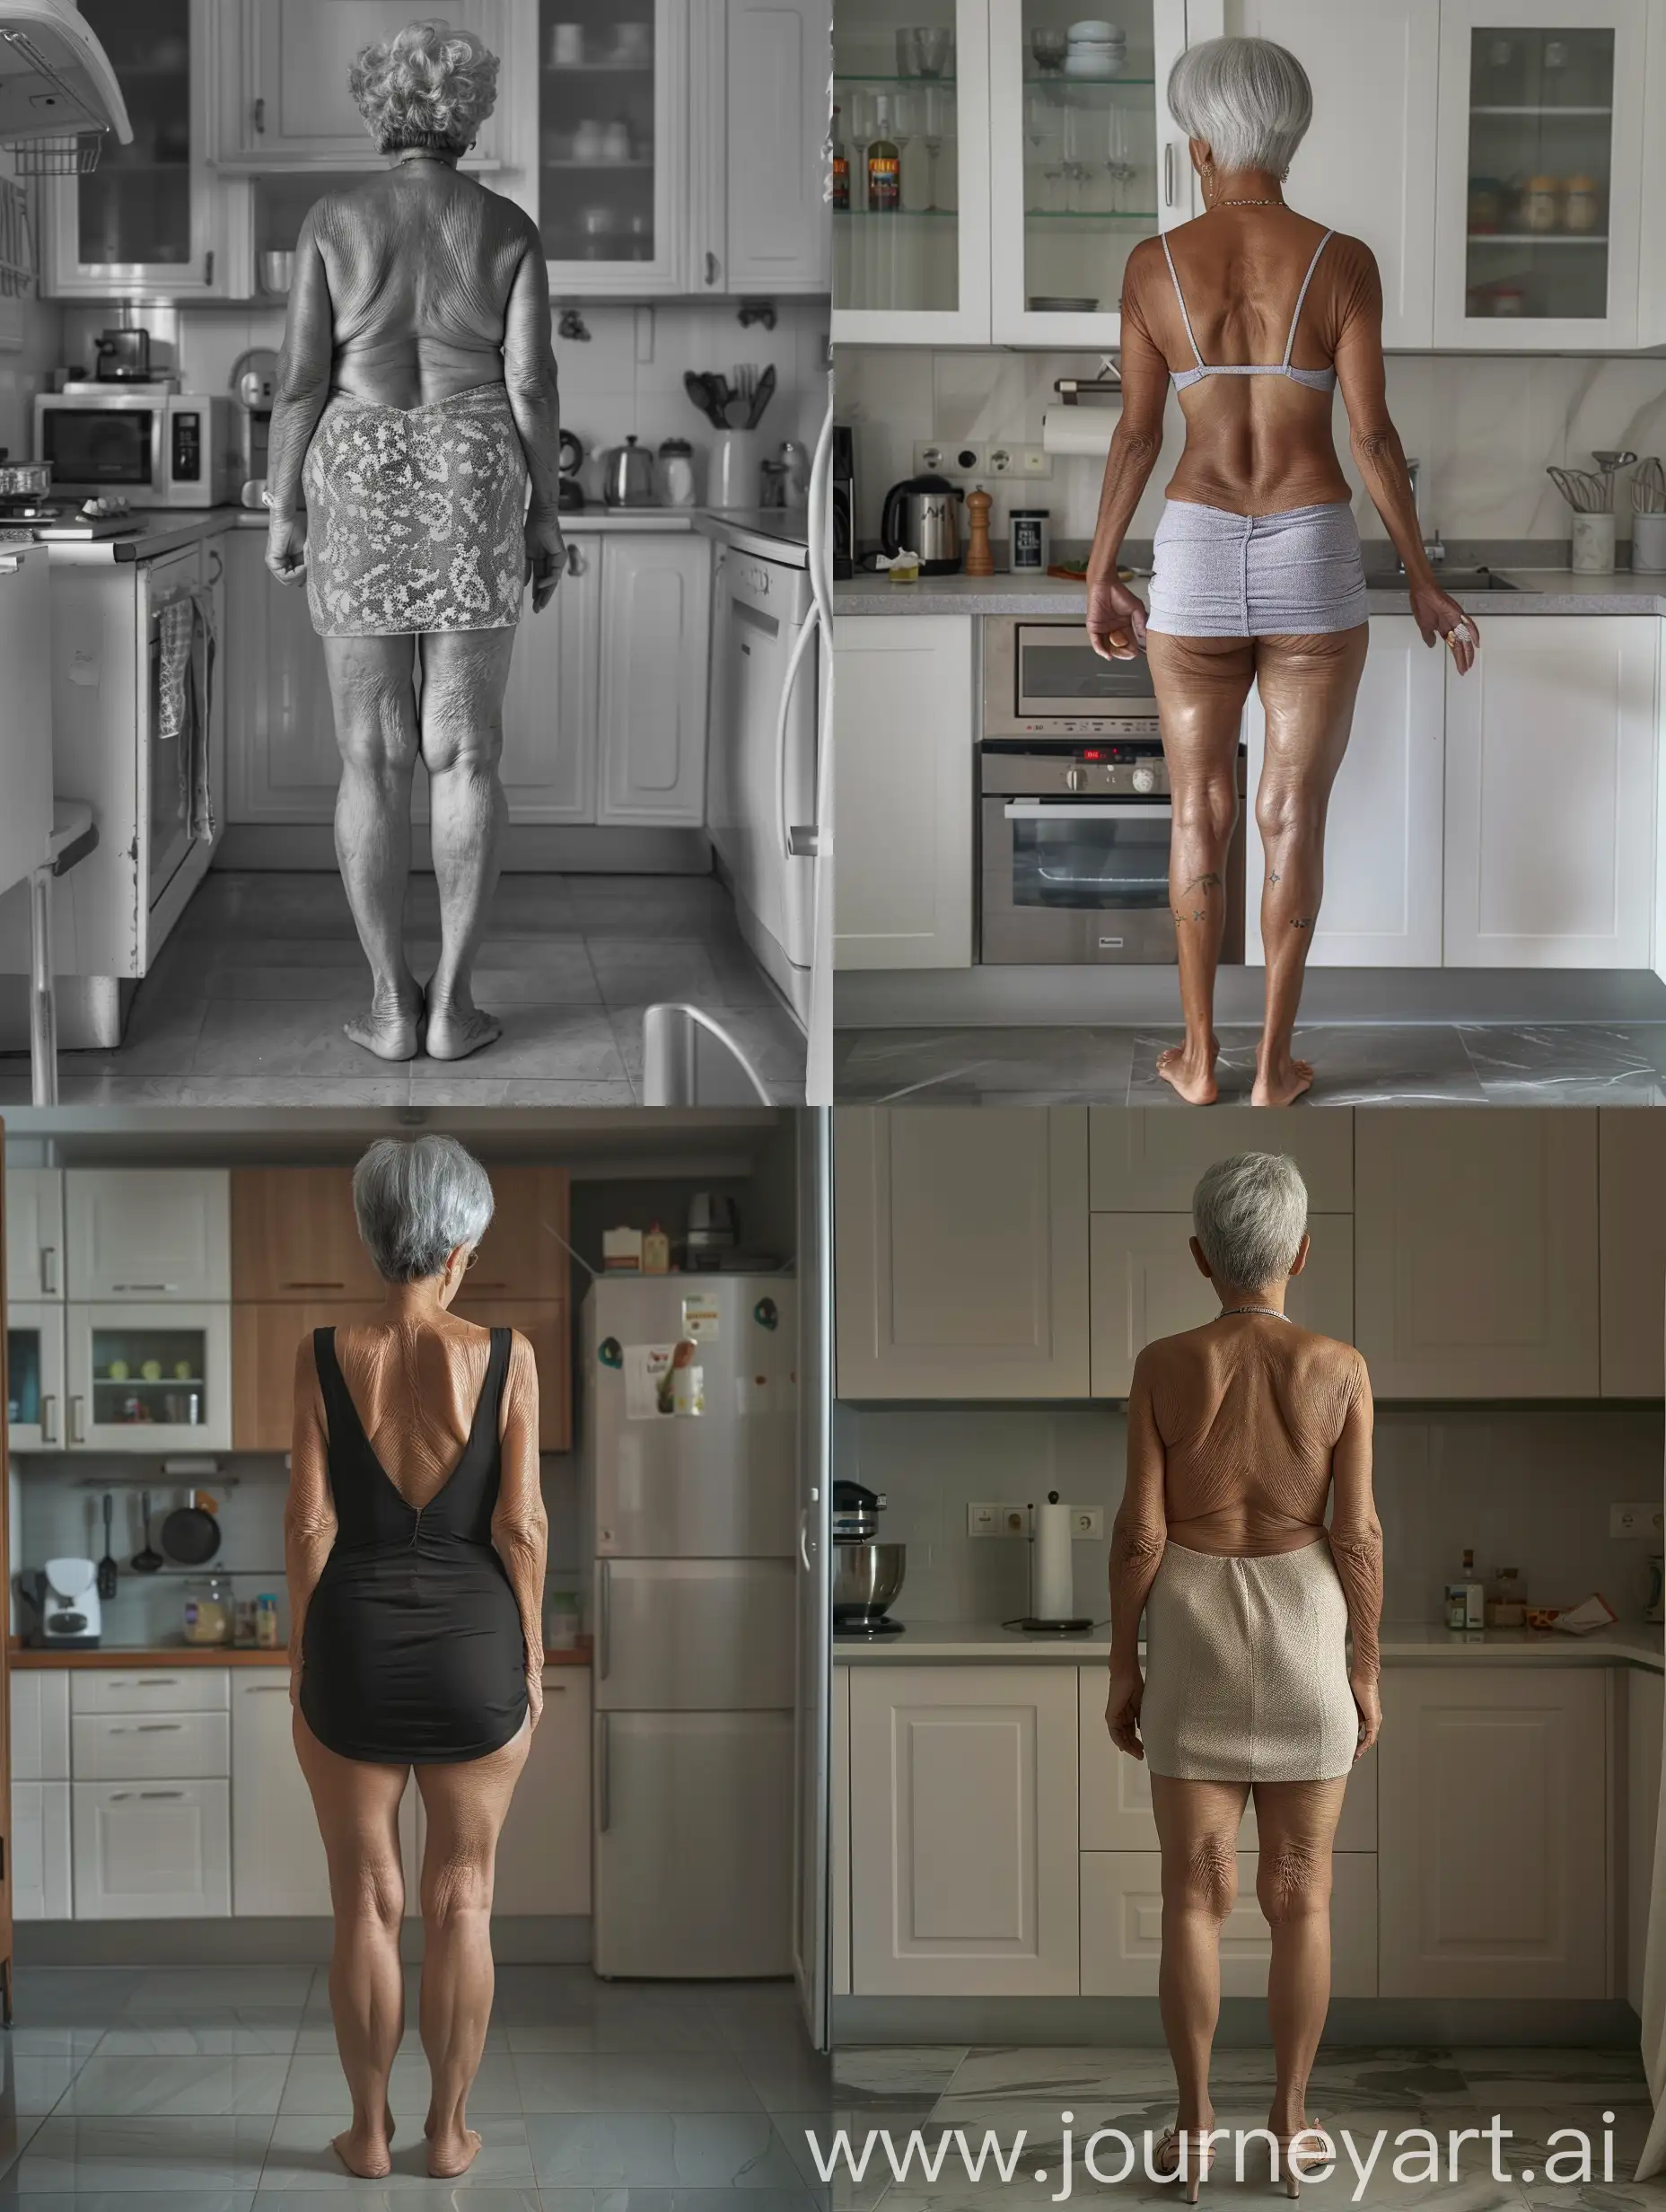 Mature-Algerian-Woman-Standing-in-Kitchen-in-Stylish-Mini-Dress-and-High-Heels